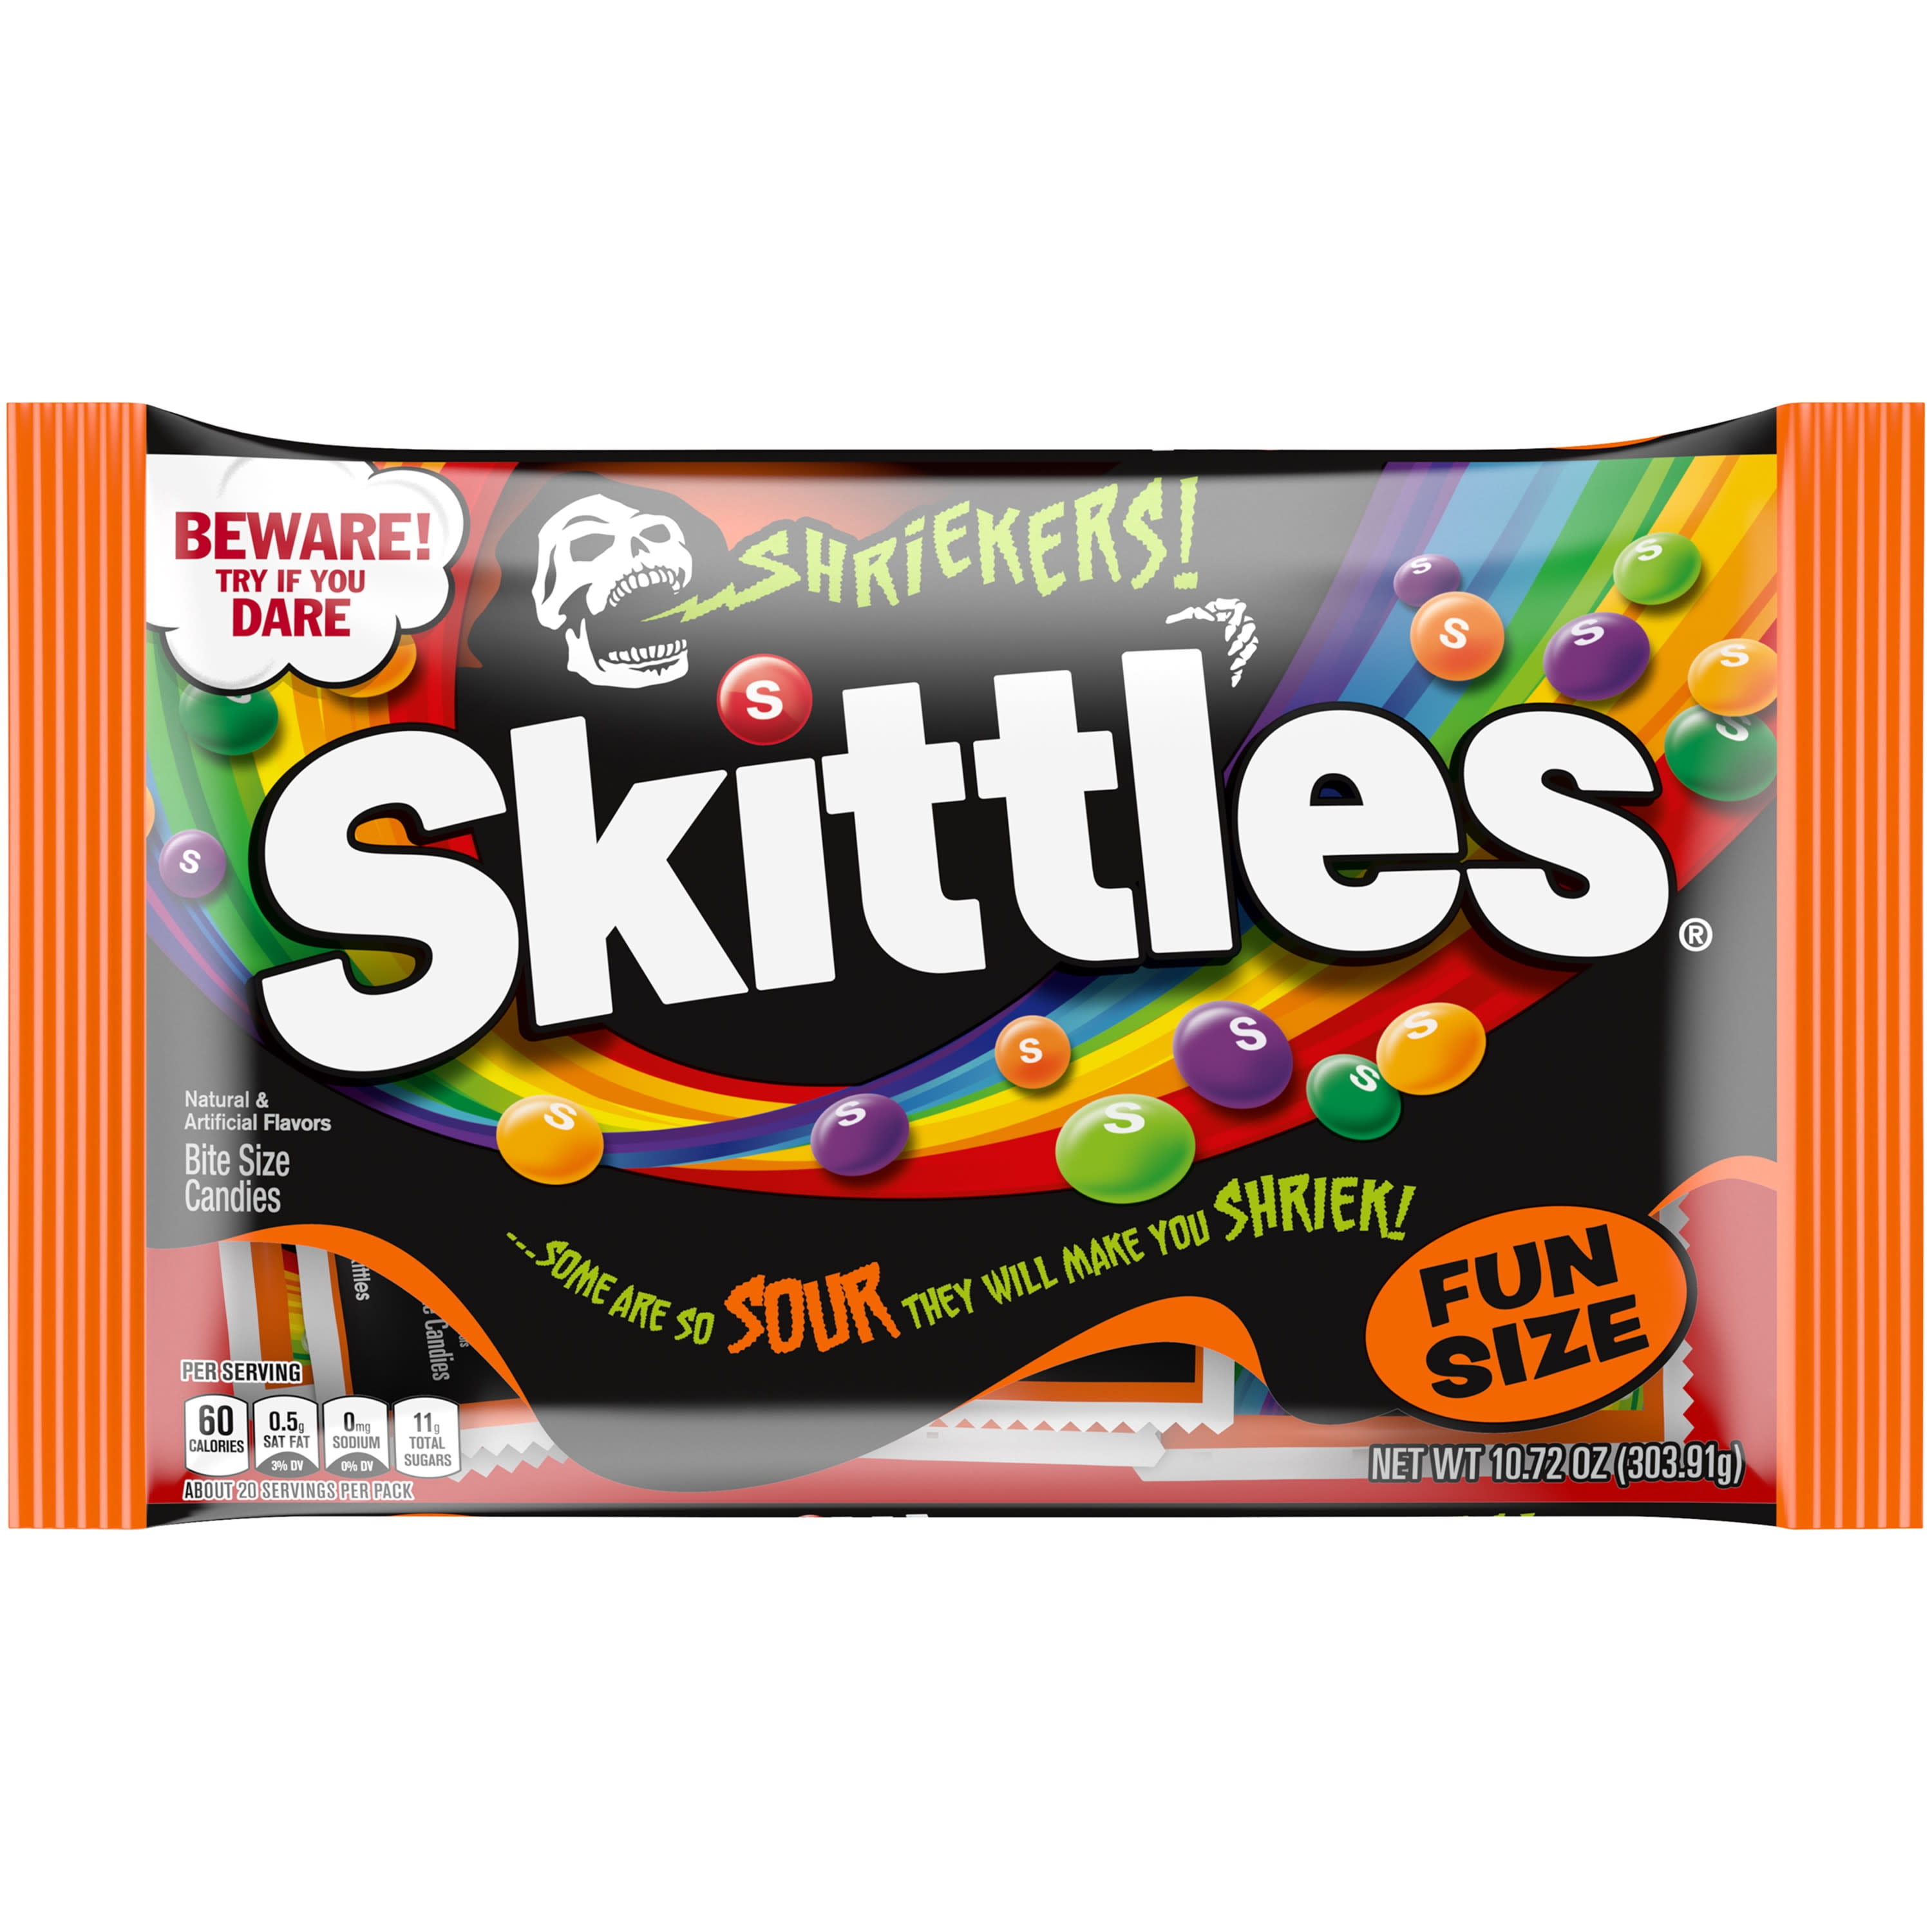 Skittles Shriekers Sour Halloween Chewy Candy Fun Size Bag 10.72oz